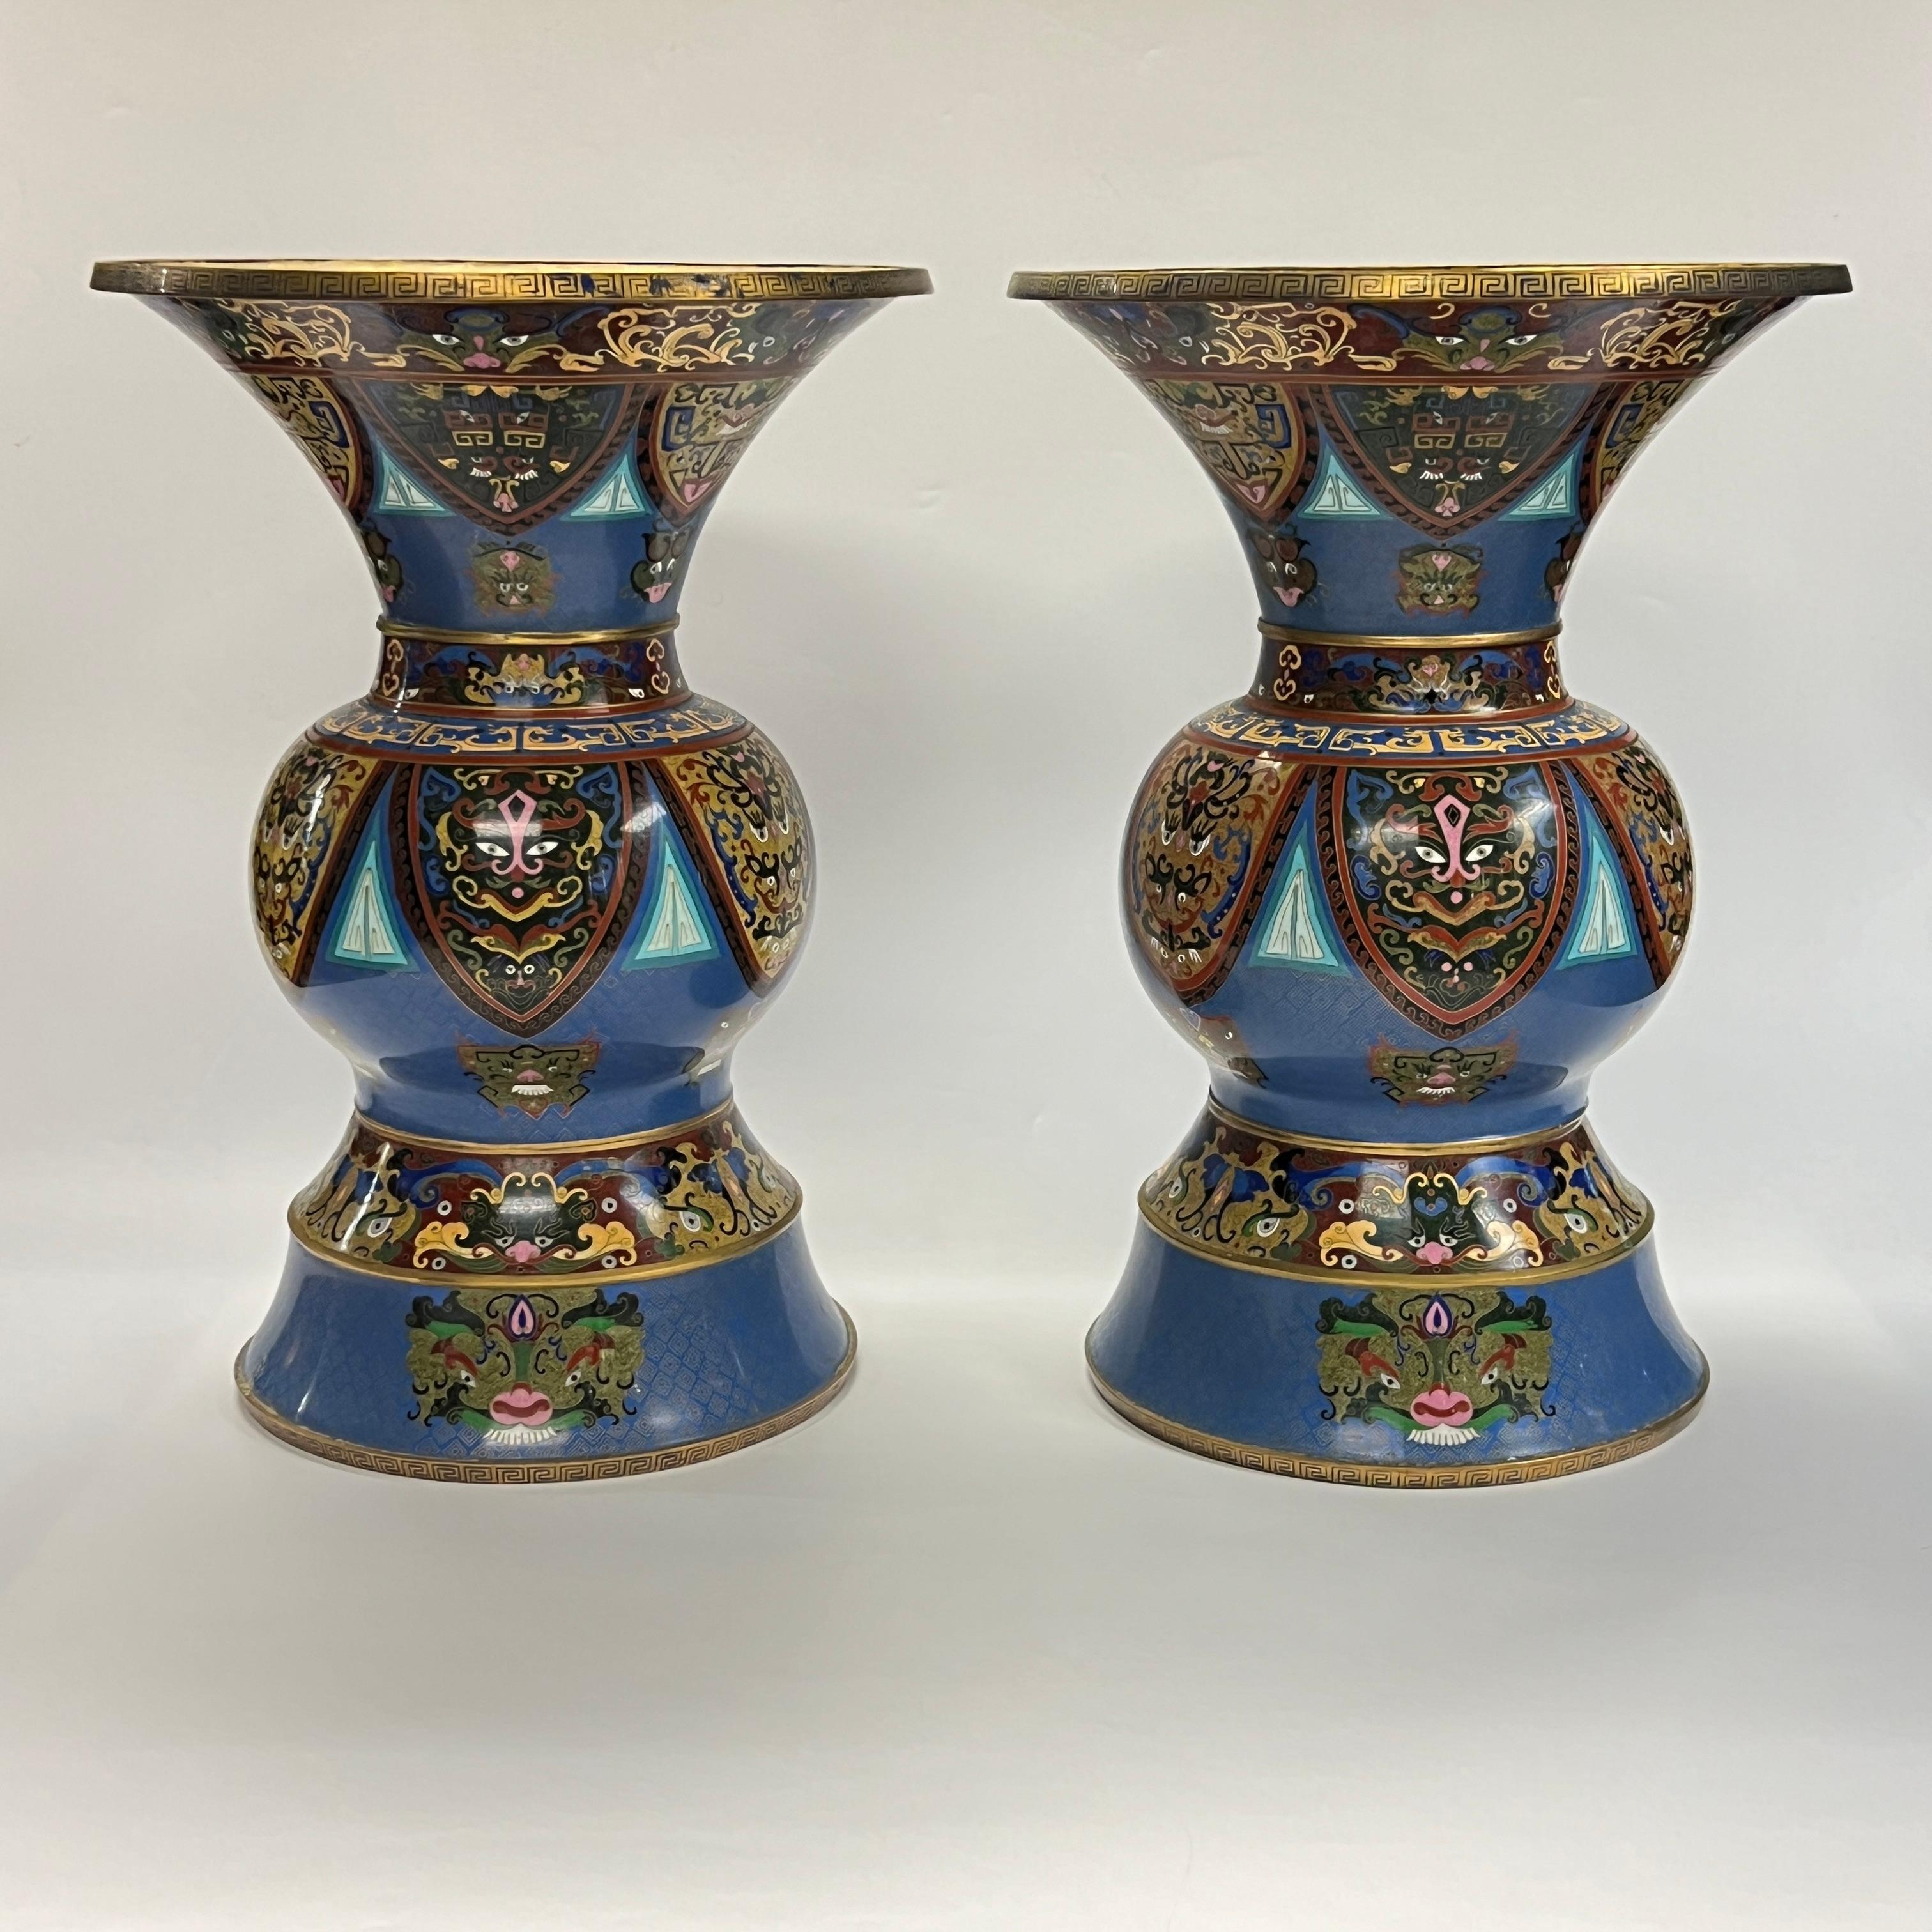 Pair of very large and finest quality , 24 inch tall, antique Chinese cloisonne vases with wide flared rims with fine cloisonne enamel designs including foo lions and exotic masks.  